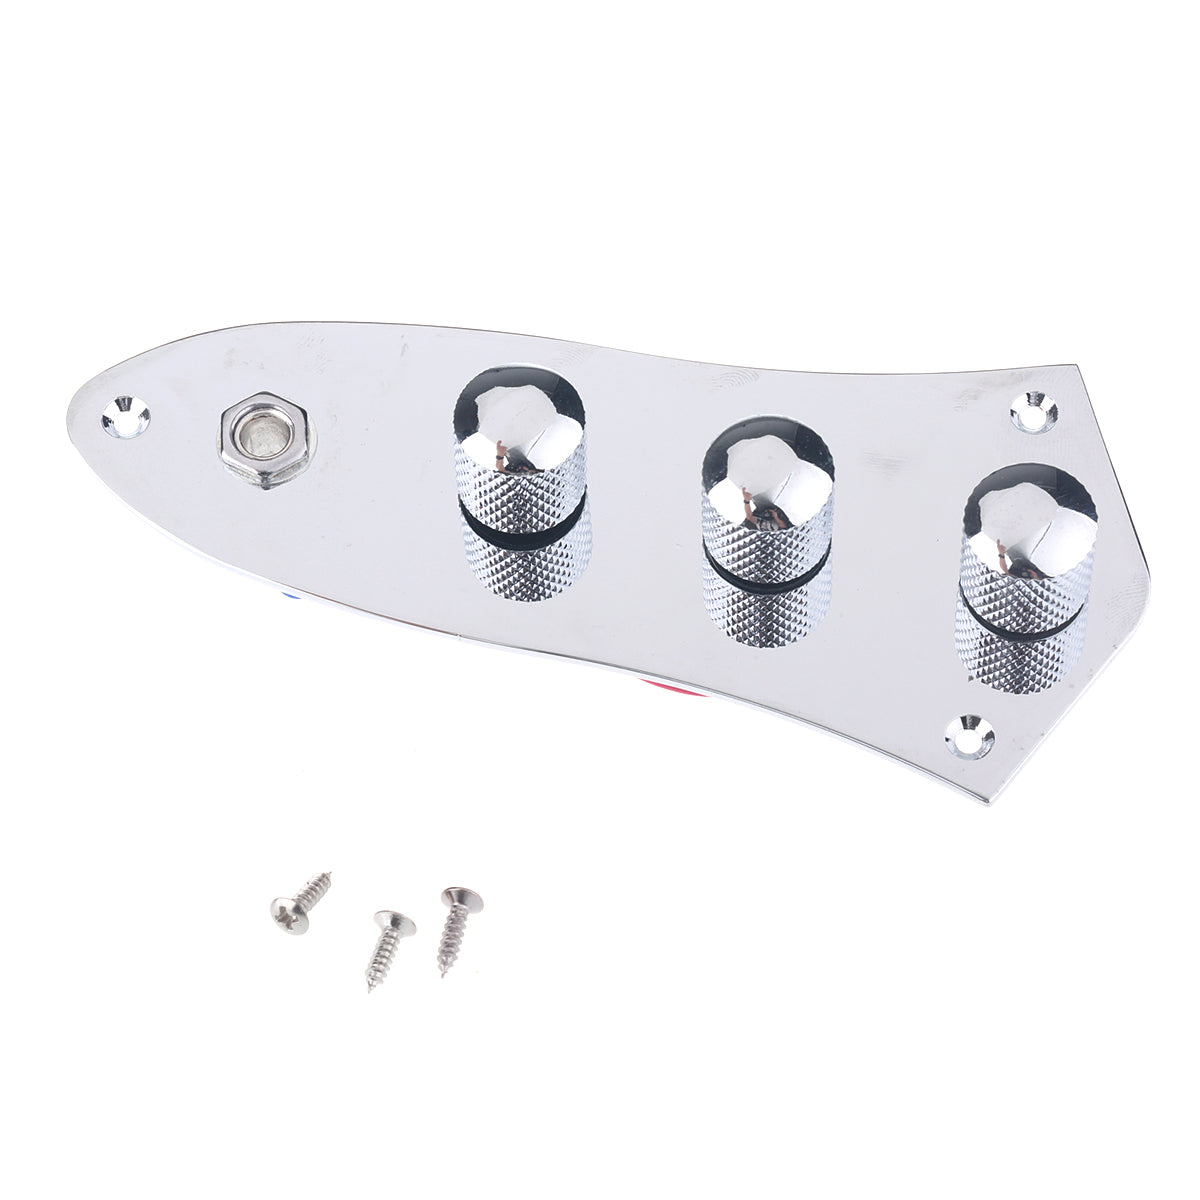 Musiclily Loaded Prewired Jazz Bass Control Plate for J Bass Style Guitar,Chrome